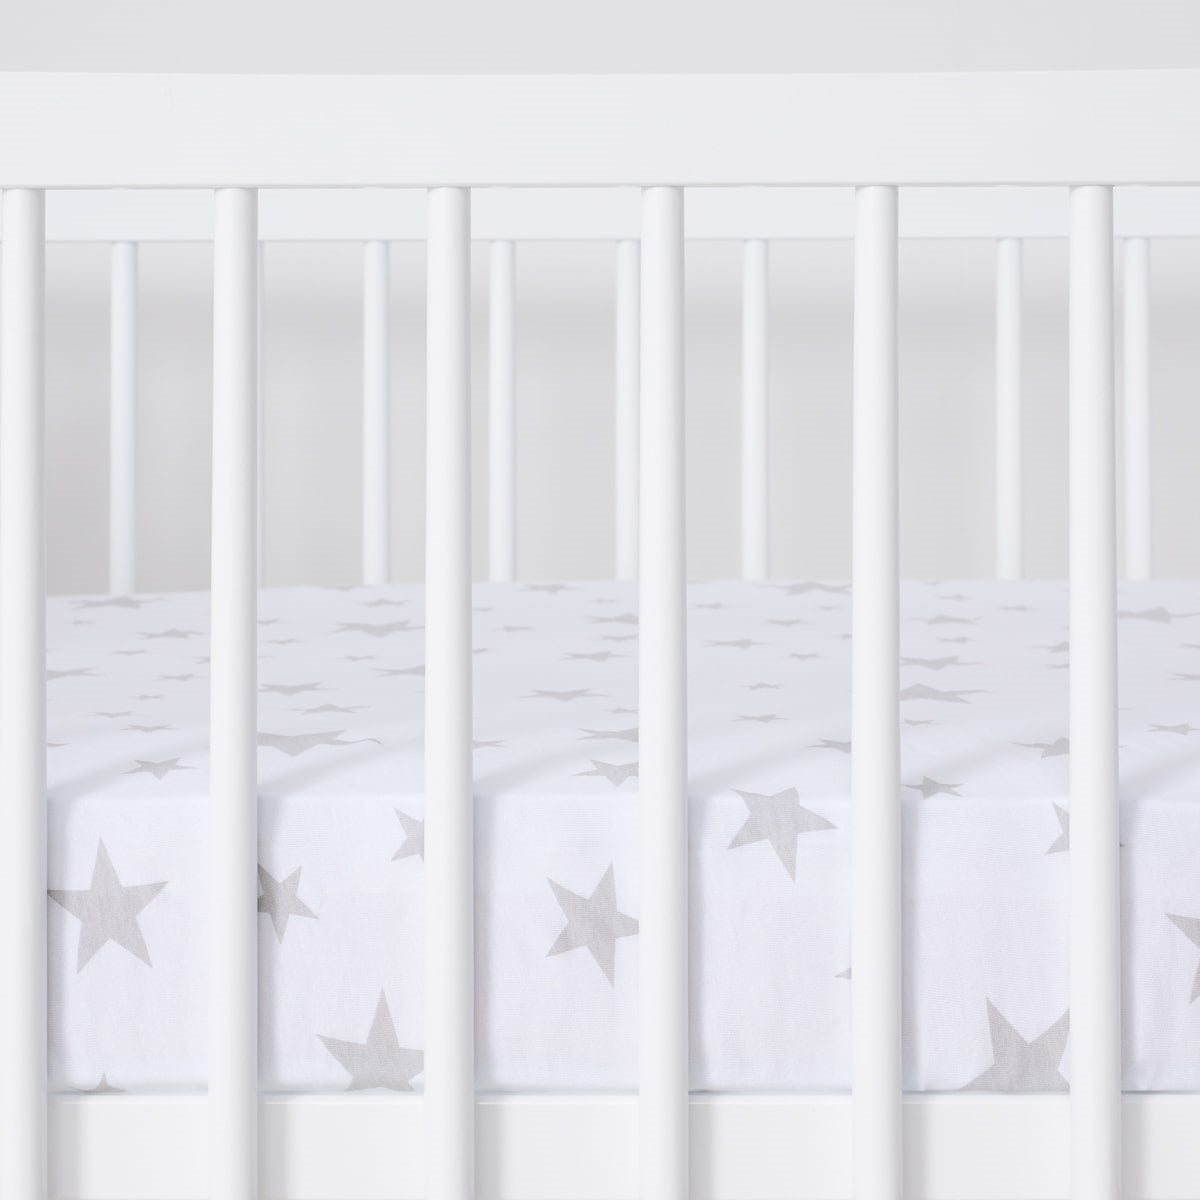 Snuz Cot & Cot Bed 2 Pack Fitted Sheet - Stars